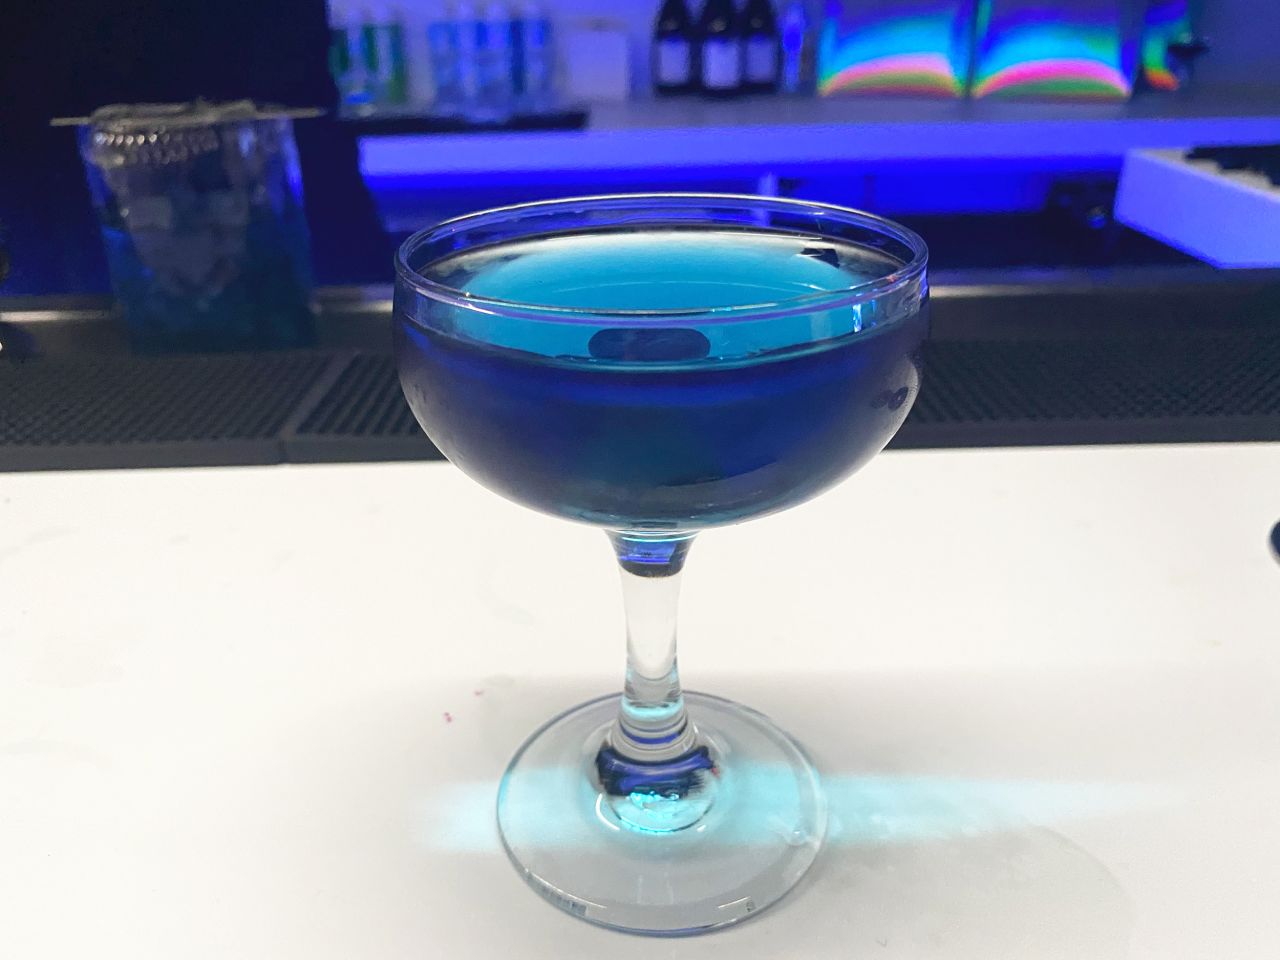 A "Classic Blue" cocktail was served at the color reveal.